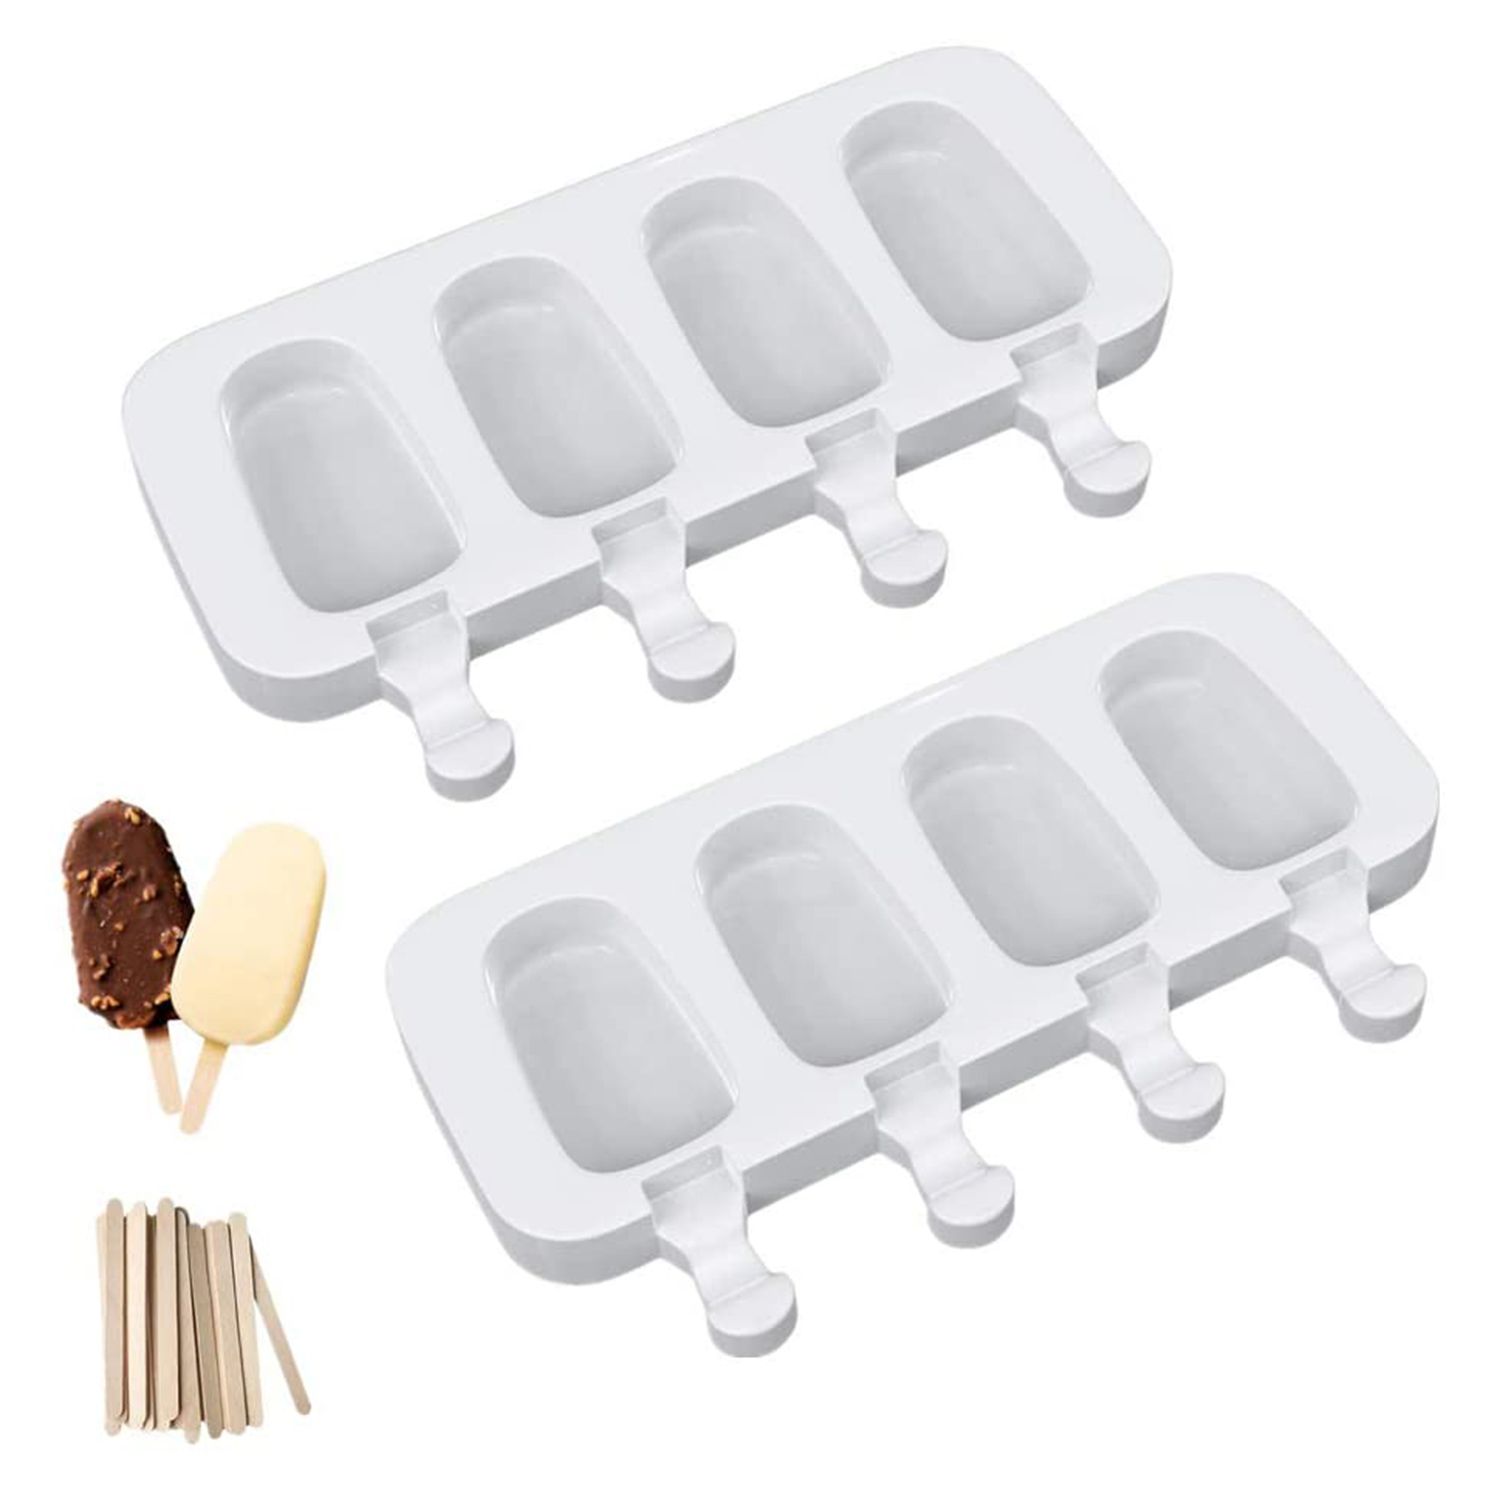 Ouddy Popsicle Molds Set